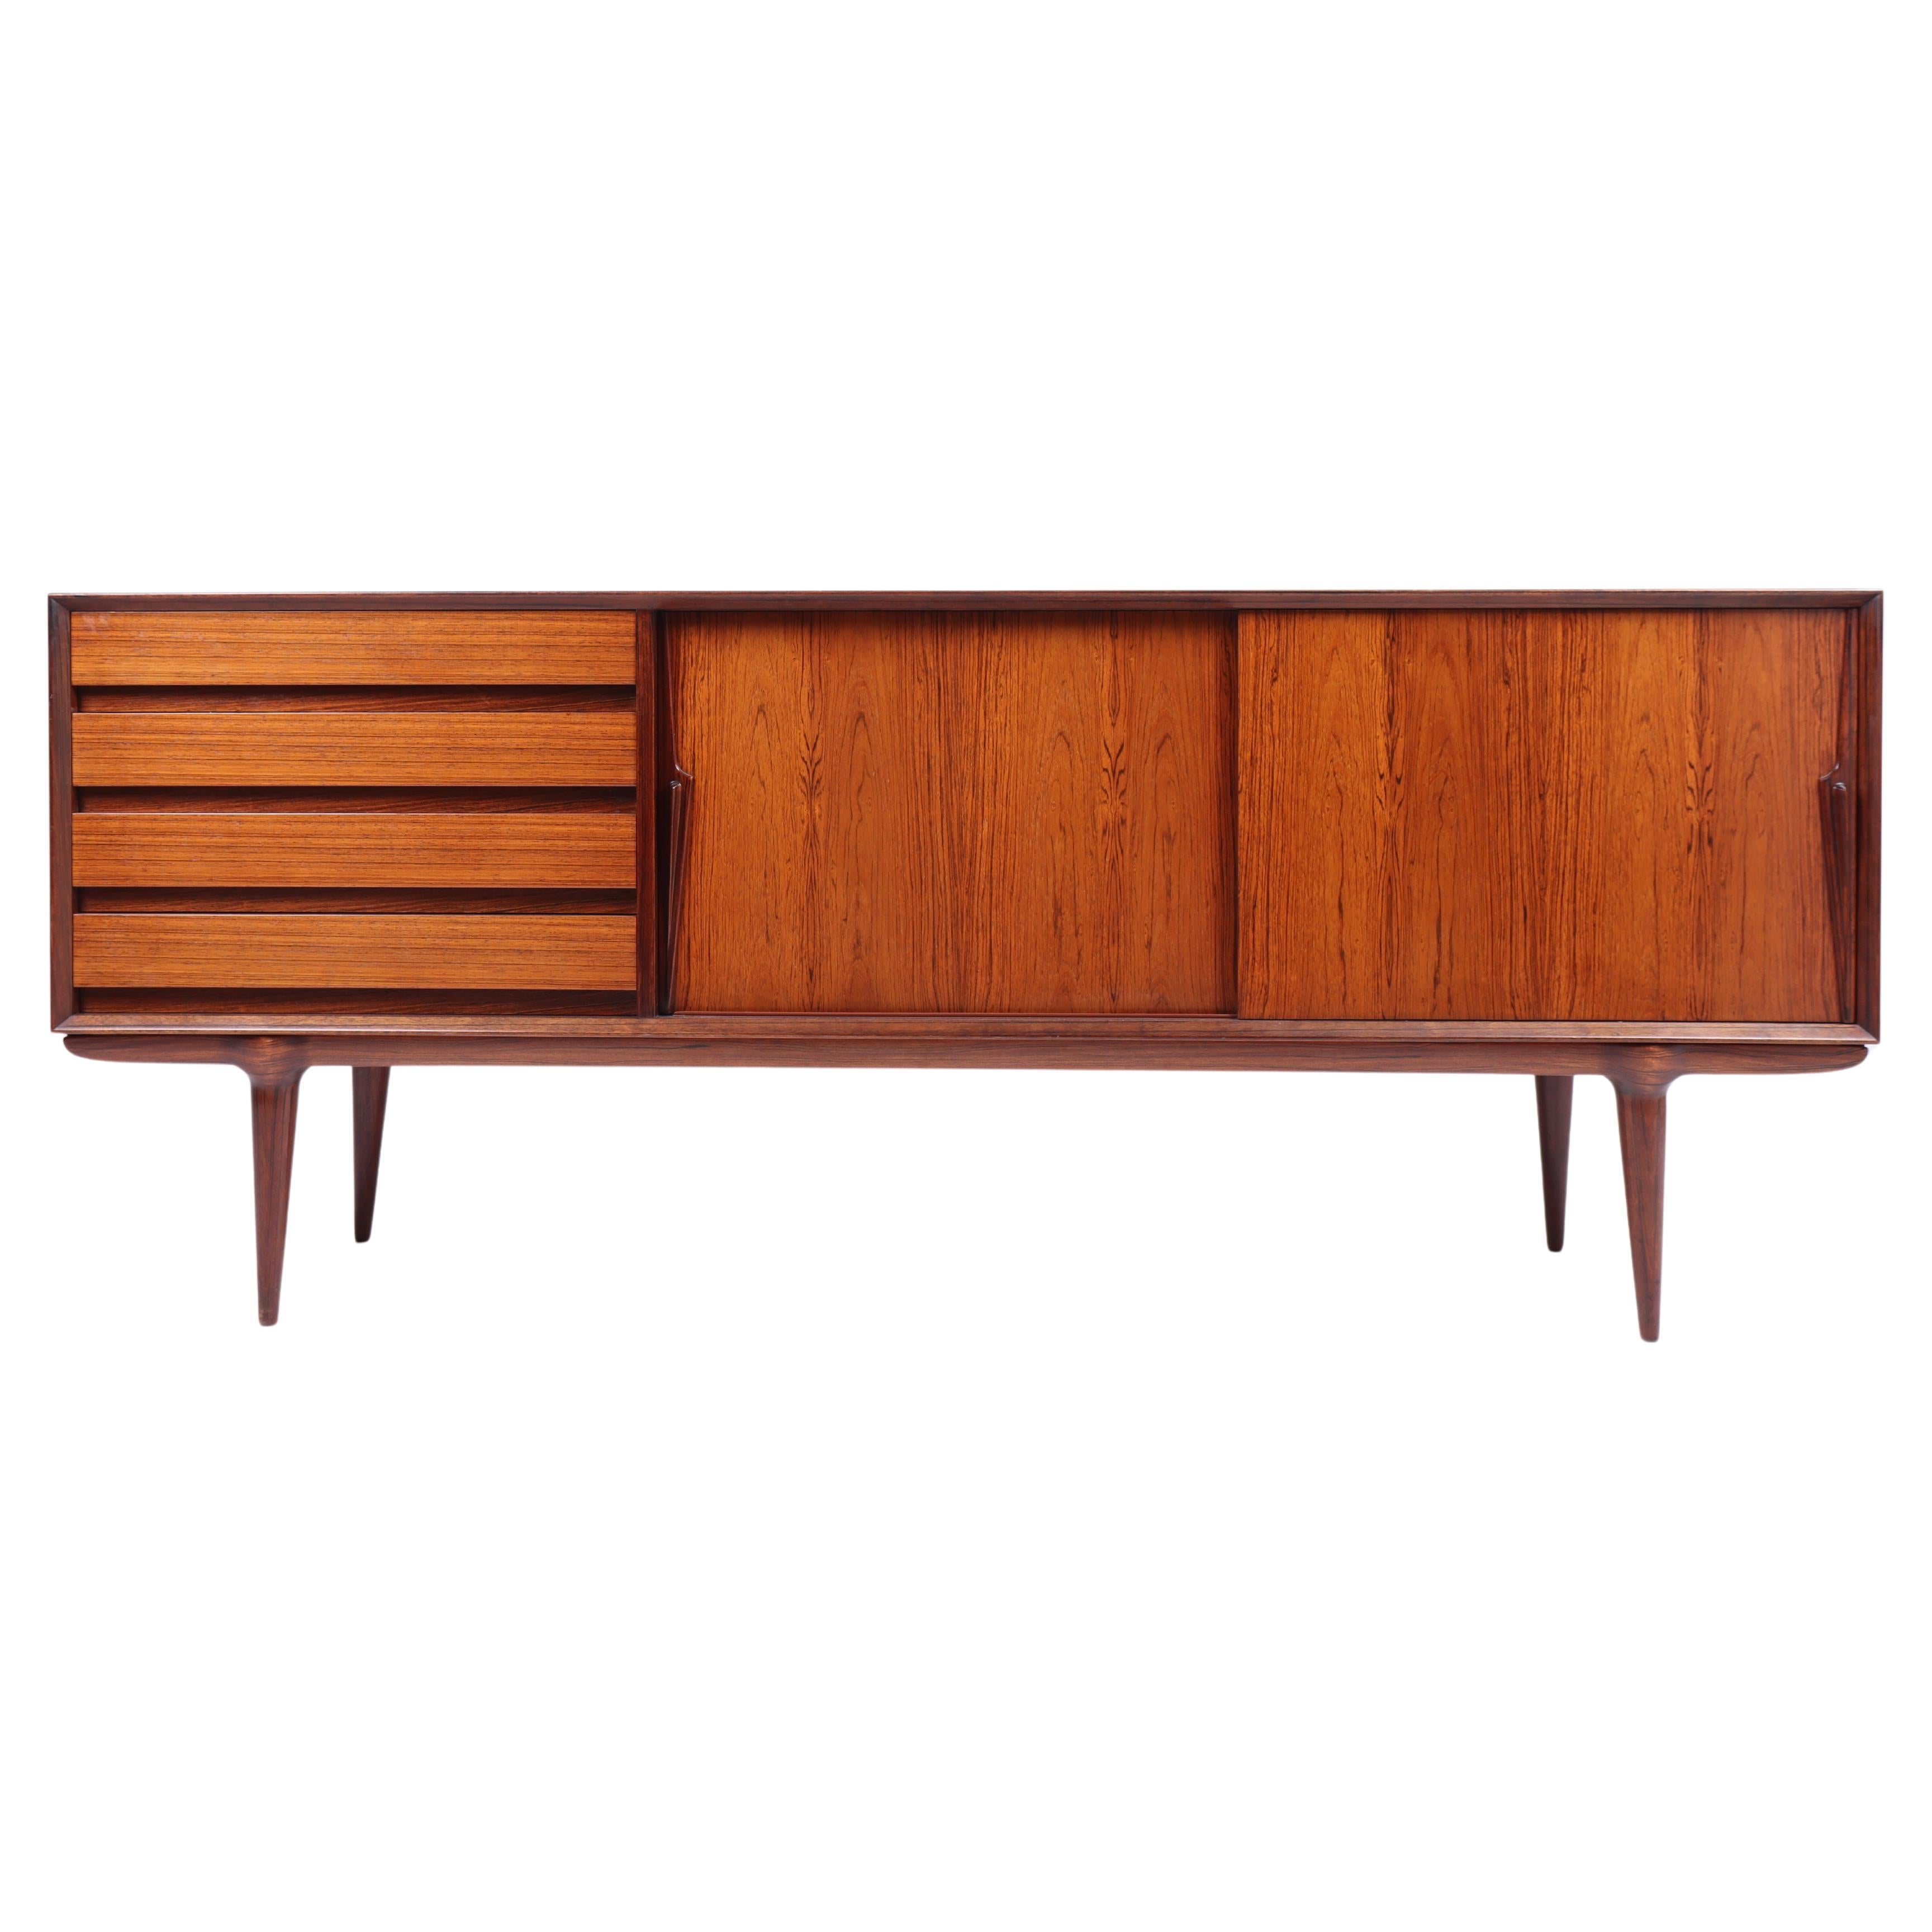 Midcentury Sideboard in Rosewood by Omann Jun, 1950s For Sale